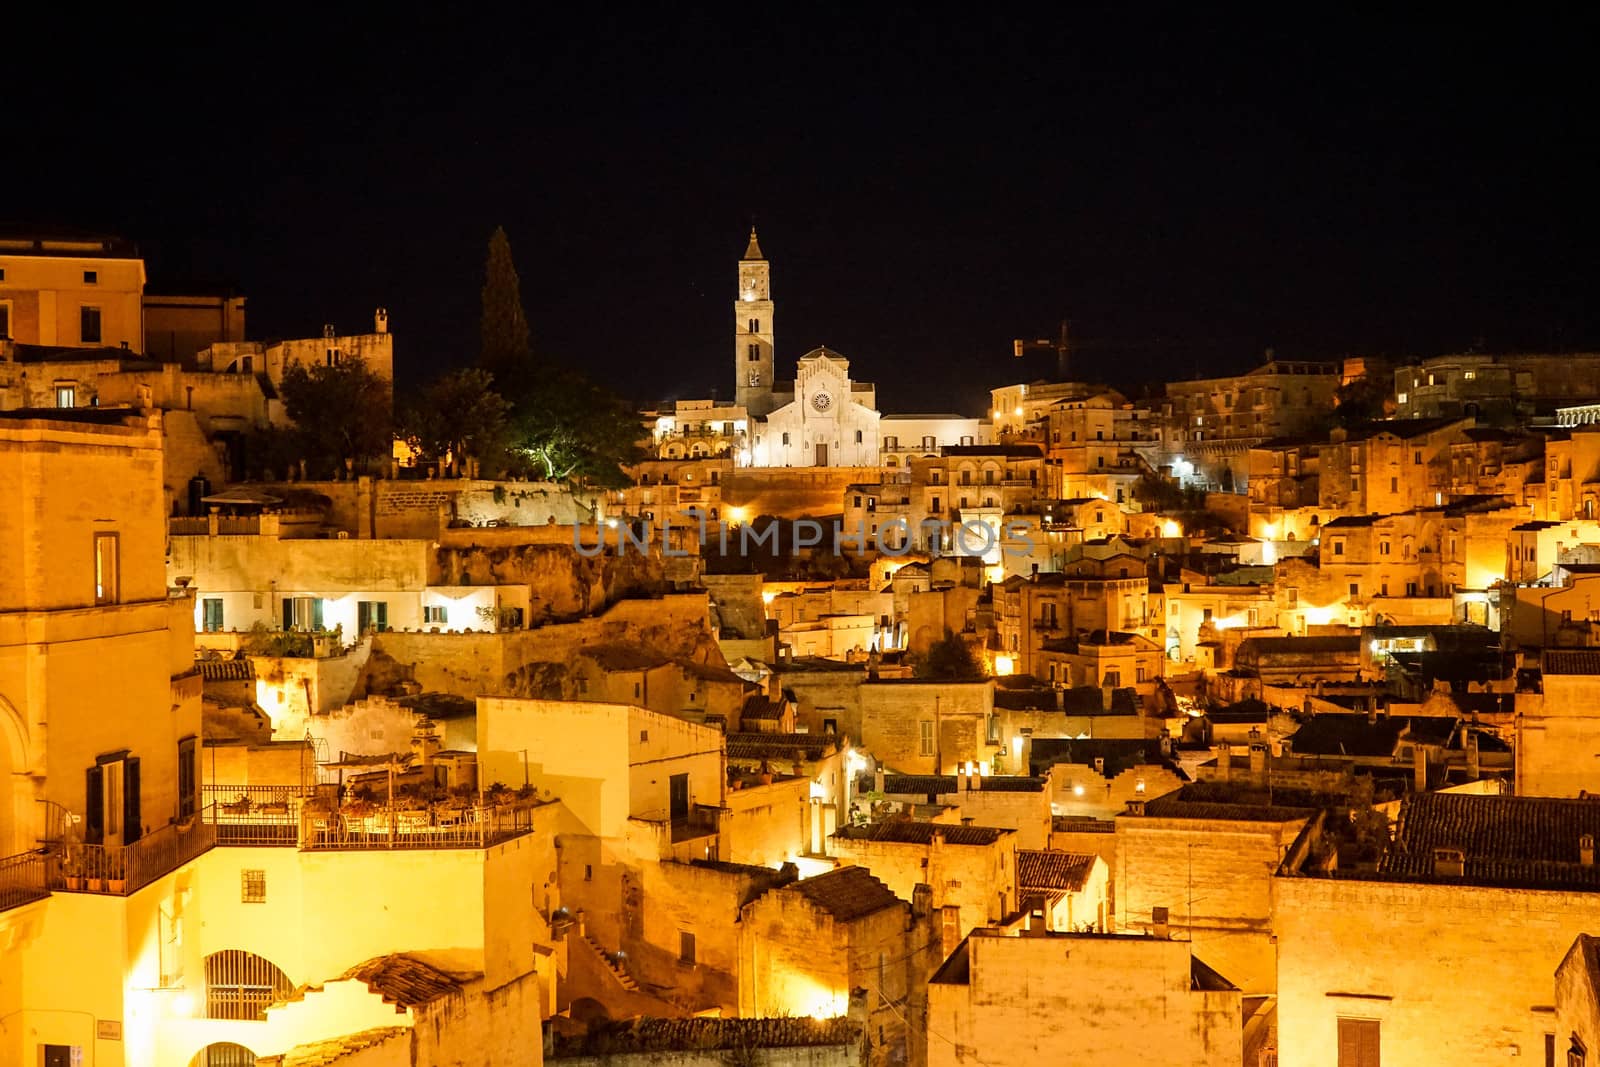 View on the Matera "stones" by cosca